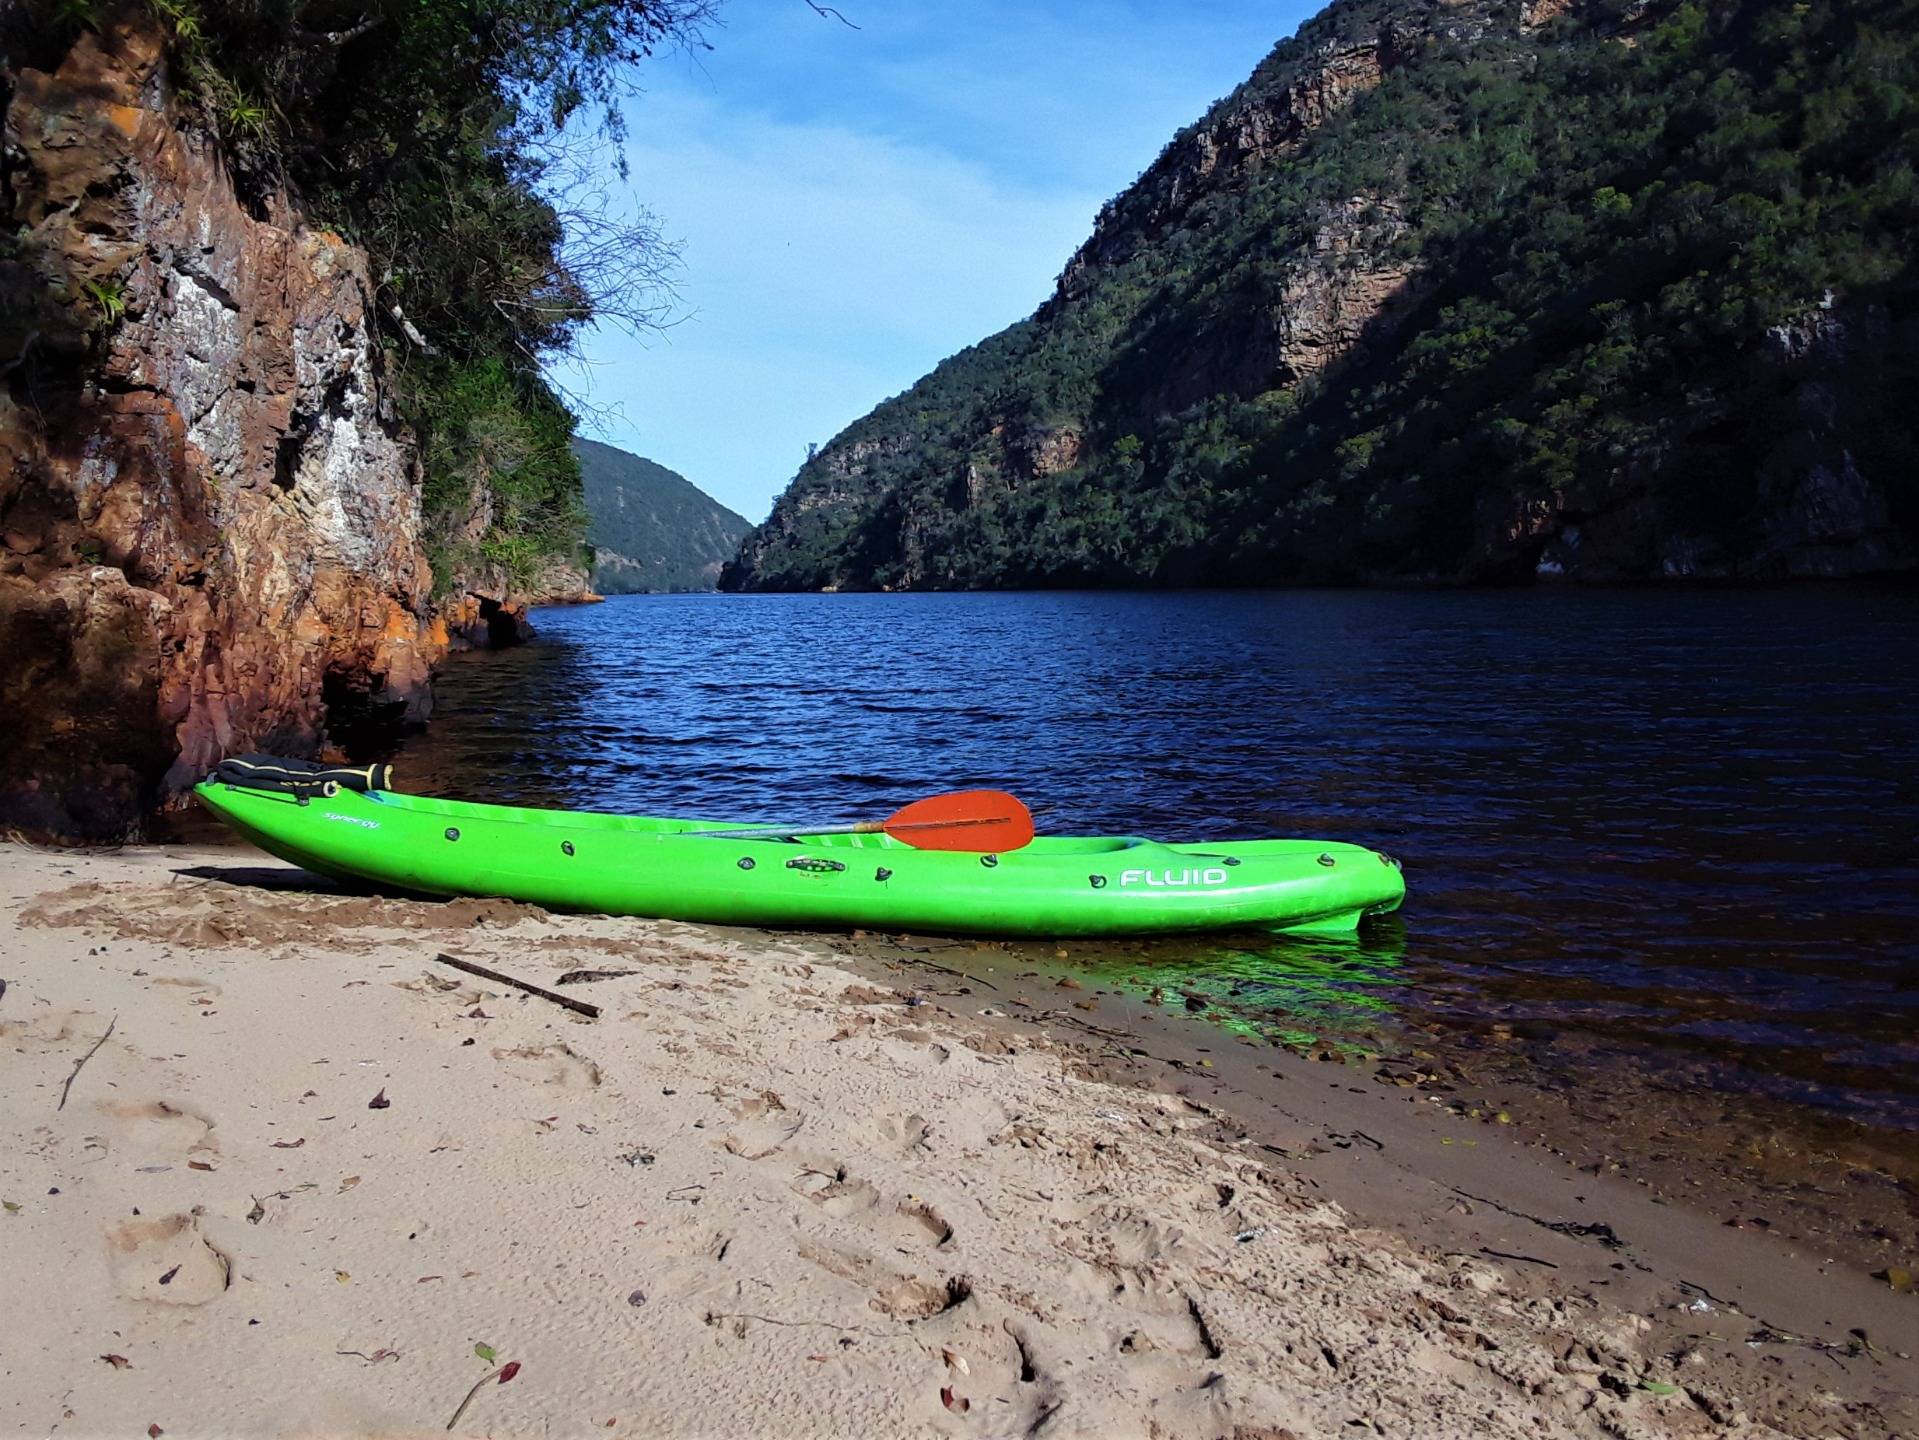 Kayaking up the Keurbooms river – Garden Route, South Africa 